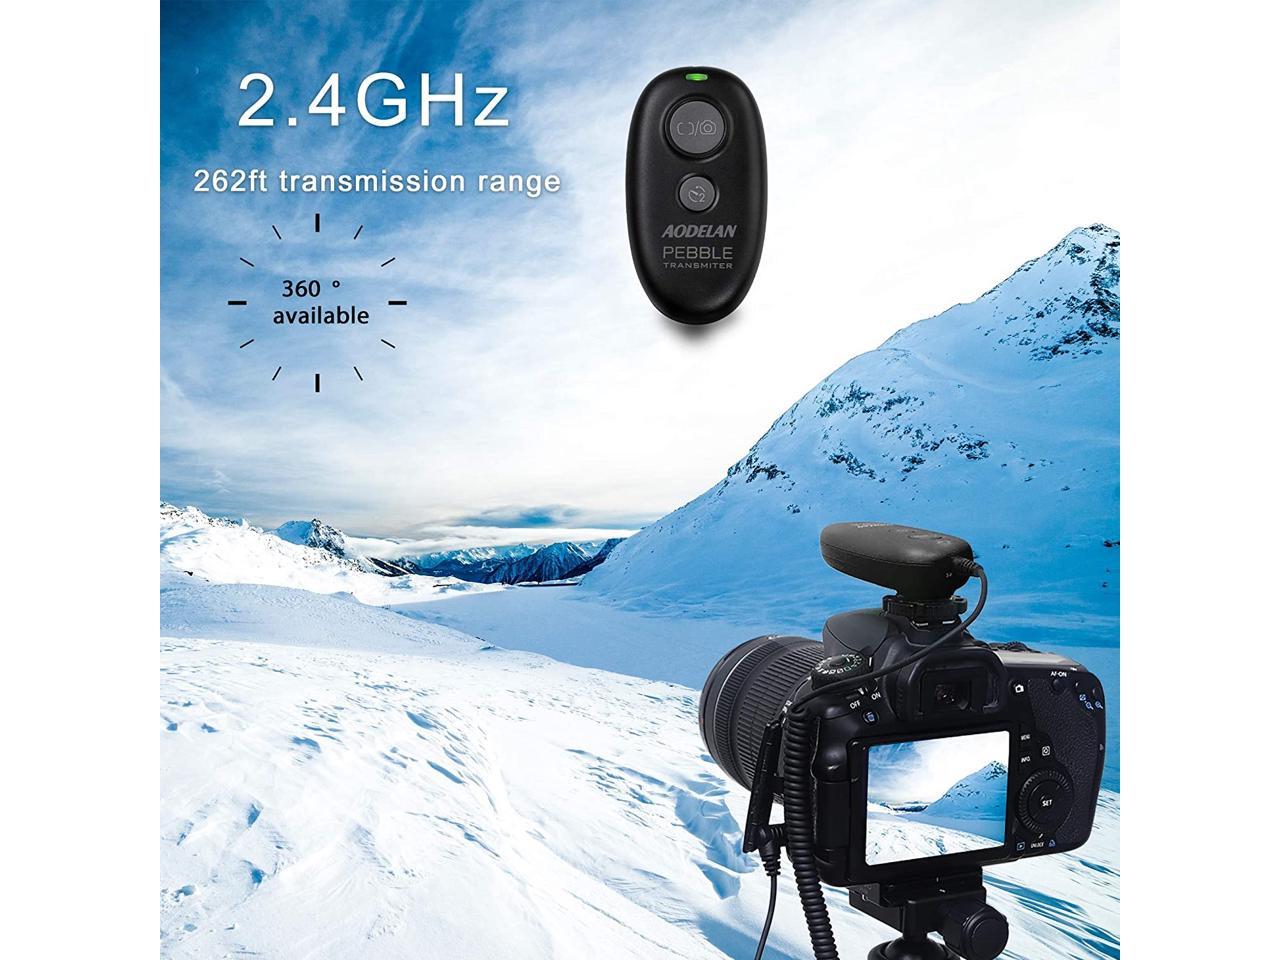 AODELAN Camera Remote Control Wireless&Wired Shutter Release for Nikon Z7,D800,D750,D5600,D850